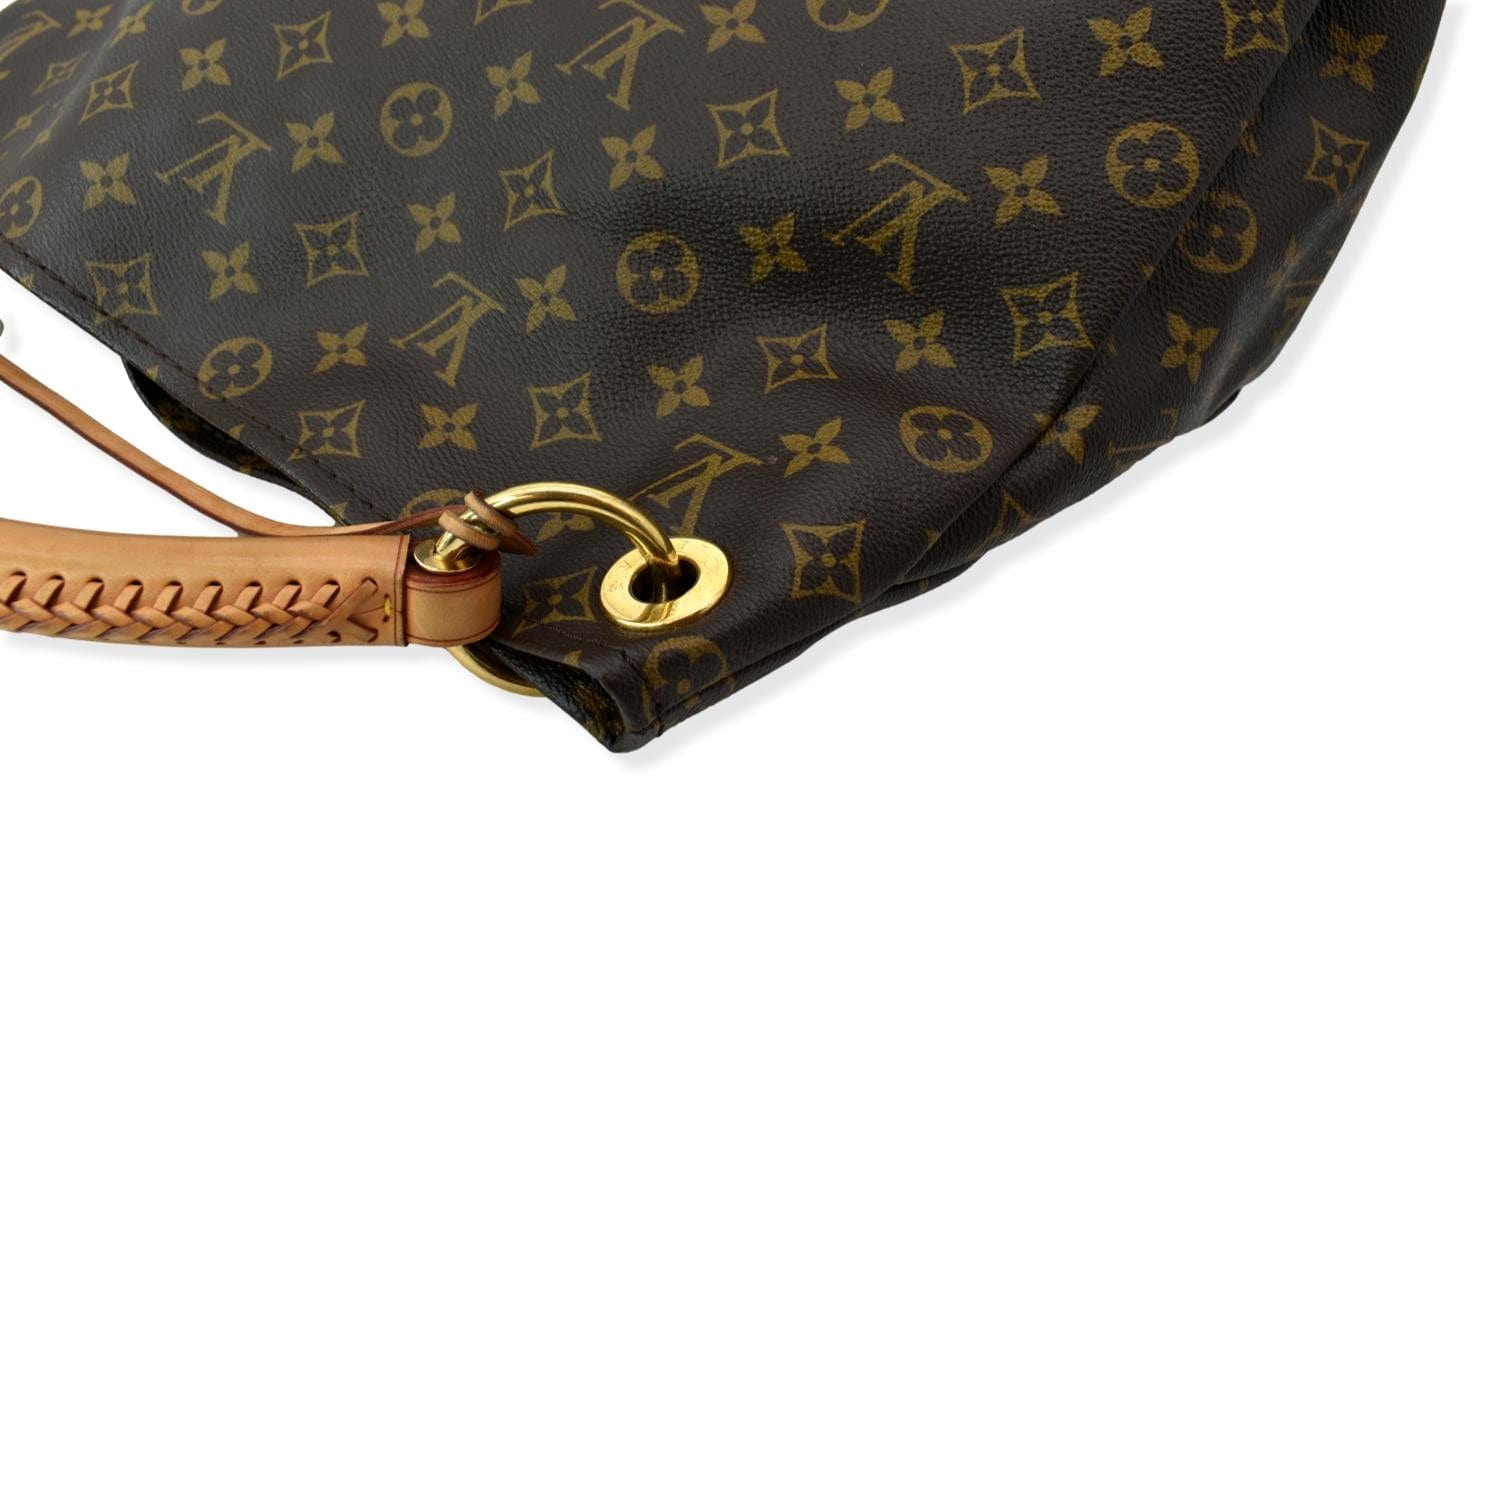 Ootd outfit of the day Louis Vuitton monogram artsy mm 